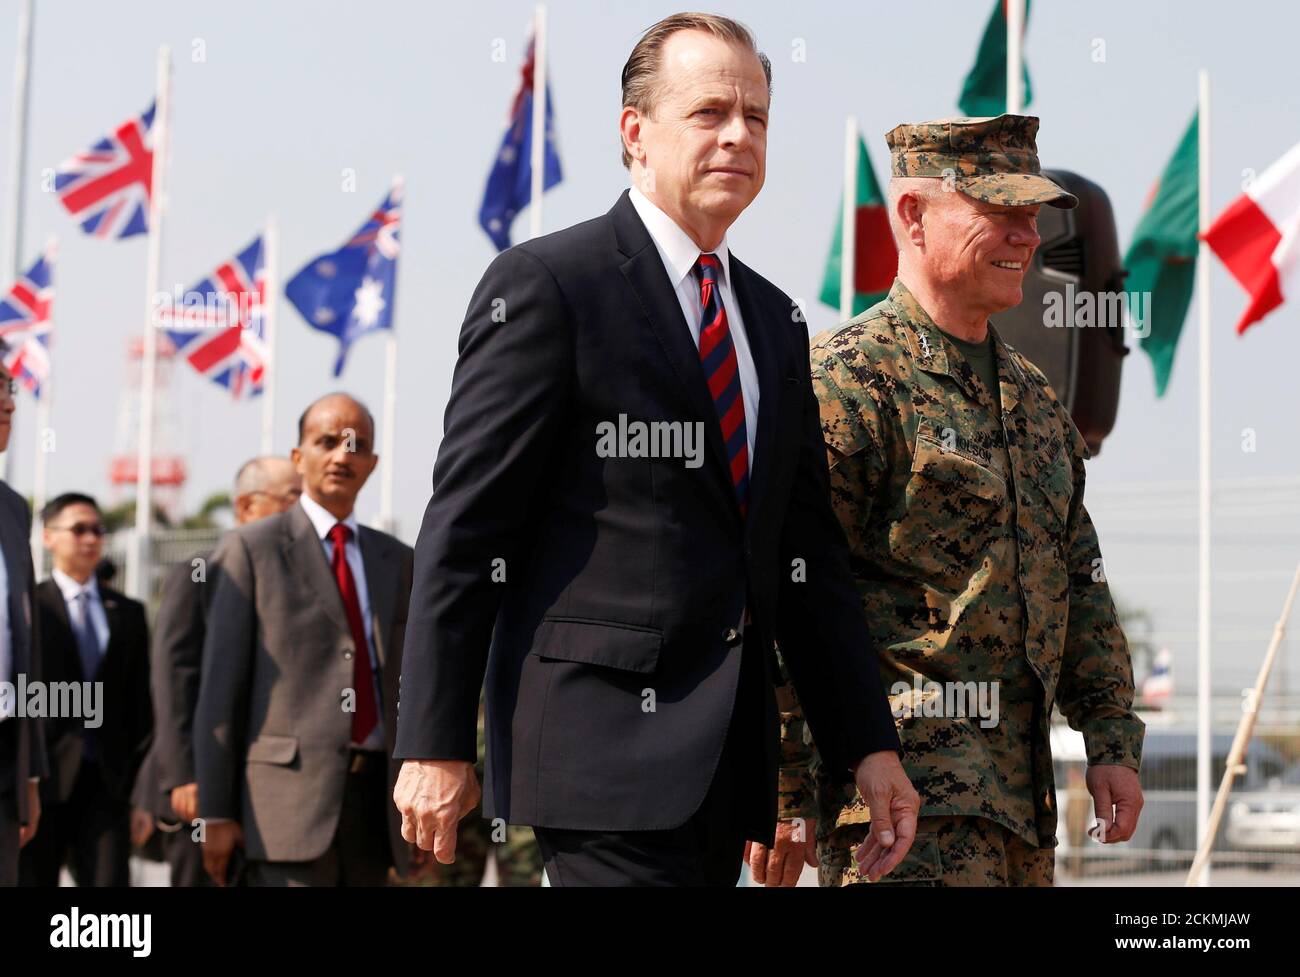 Ambassador Glyn T. Davies (L) and Lt. Gen. Lawrence D. Nicholson, Commanding General, III Marine Expeditionary Force attend opening ceremony of Cobra Gold, Asia's largest annual multilateral military exercise, outside Bangkok, Thailand February 13, 2018. REUTERS/Soe Zeya Tun Stock Photo